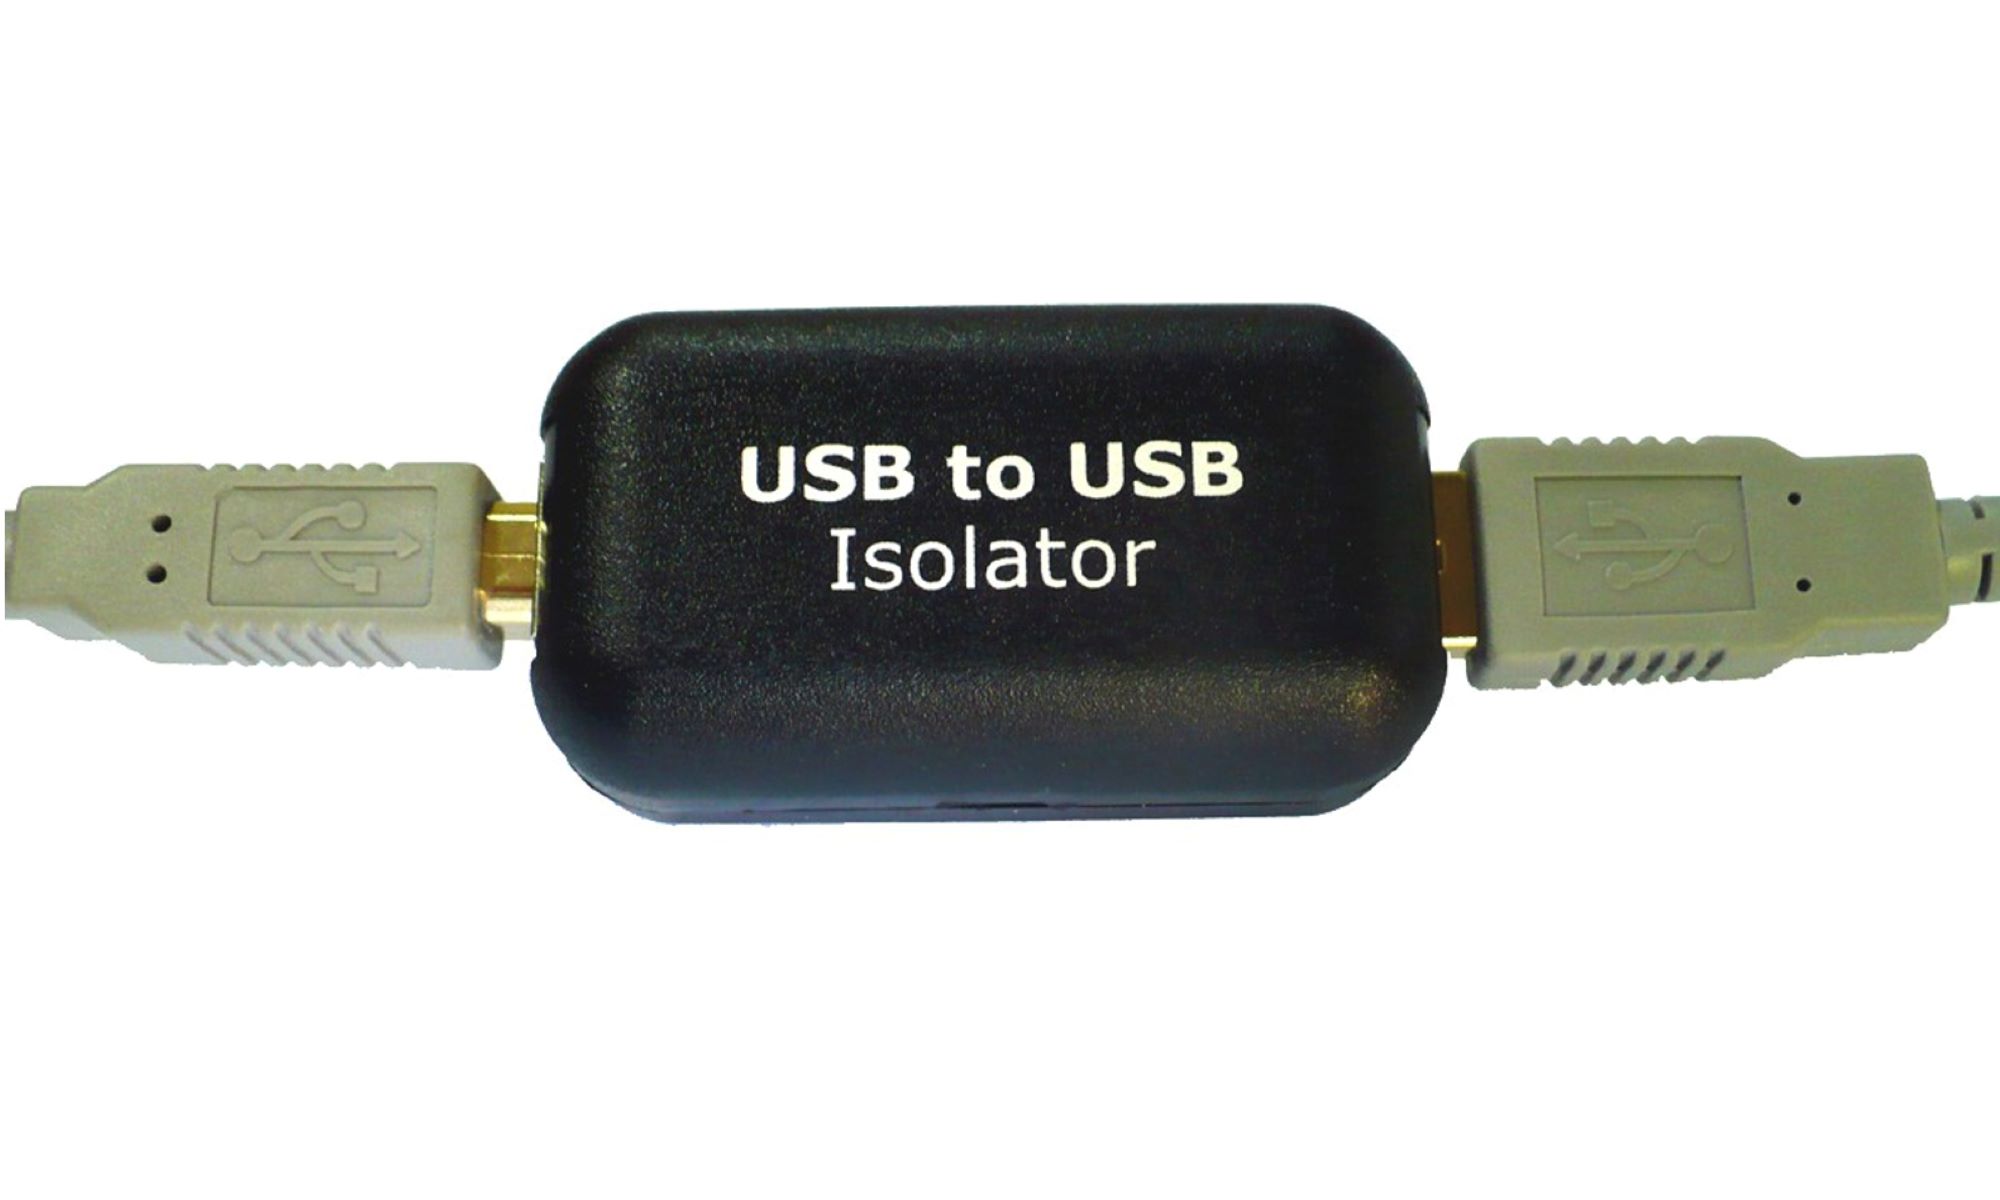 how-to-protect-a-usb-hub-and-computer-with-a-usb-isolator-on-the-same-power-strip